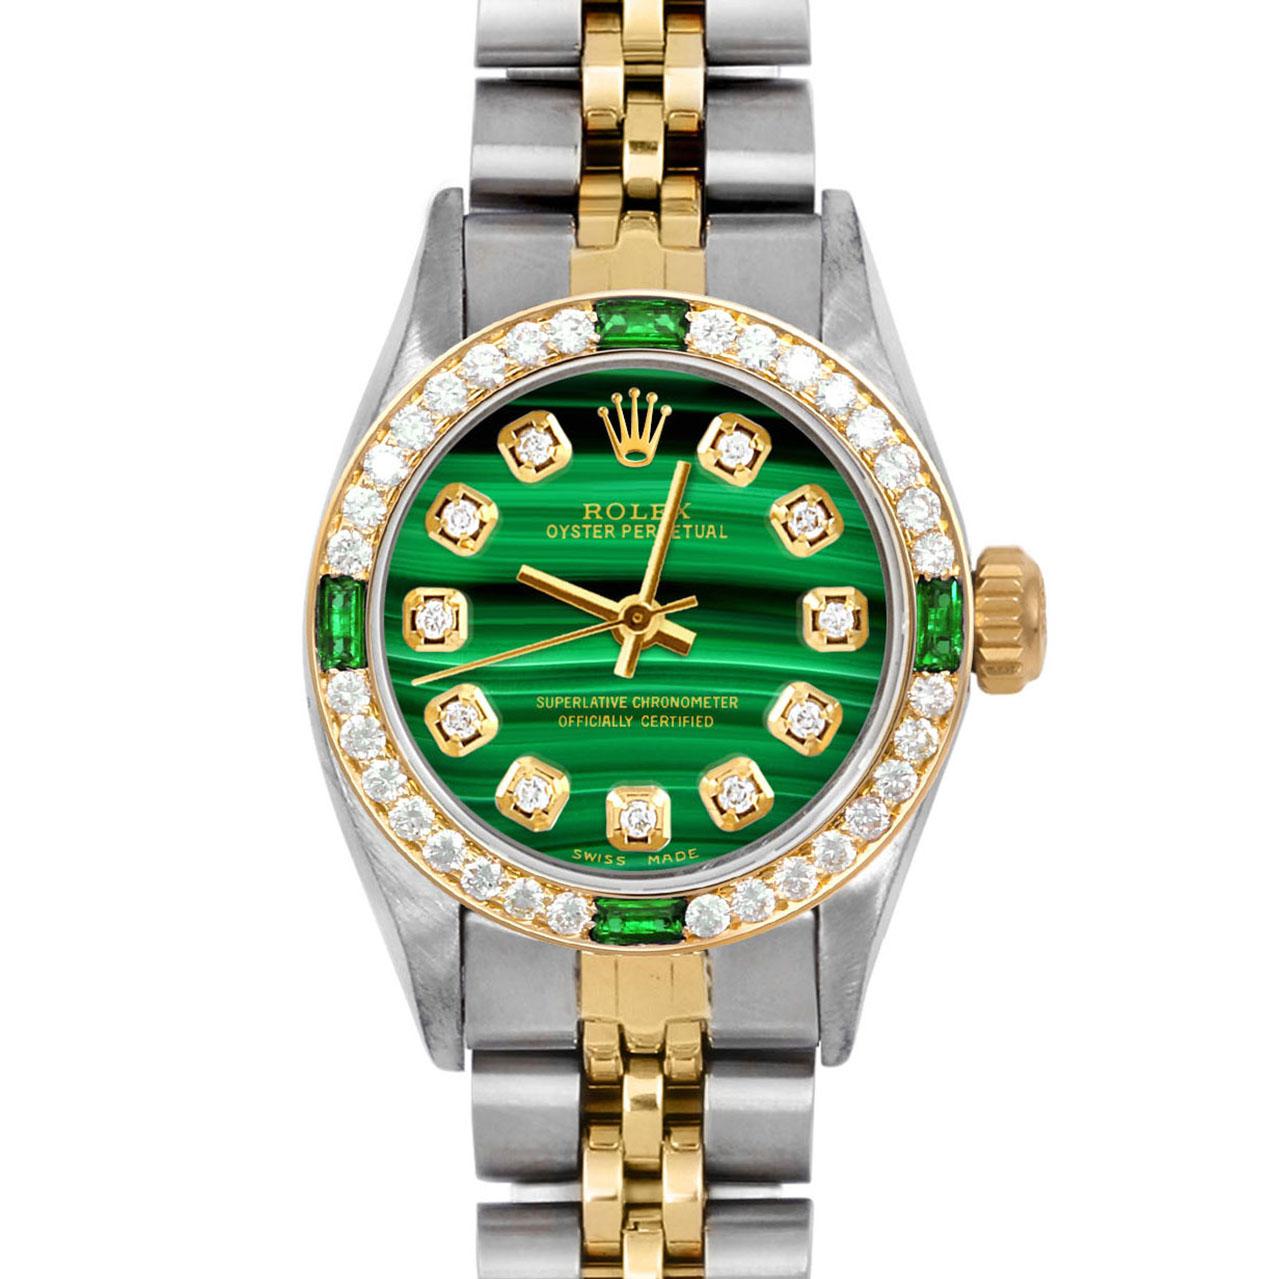 Brand : Rolex
Model : Oyster Perpetual 
Gender : Ladies
Metals : 14K Yellow Gold / Stainless Steel
Case Size : 24 mm

Dial : Custom Malachite Diamond Dial (This dial is not original Rolex And has been added aftermarket yet is a beautiful Custom